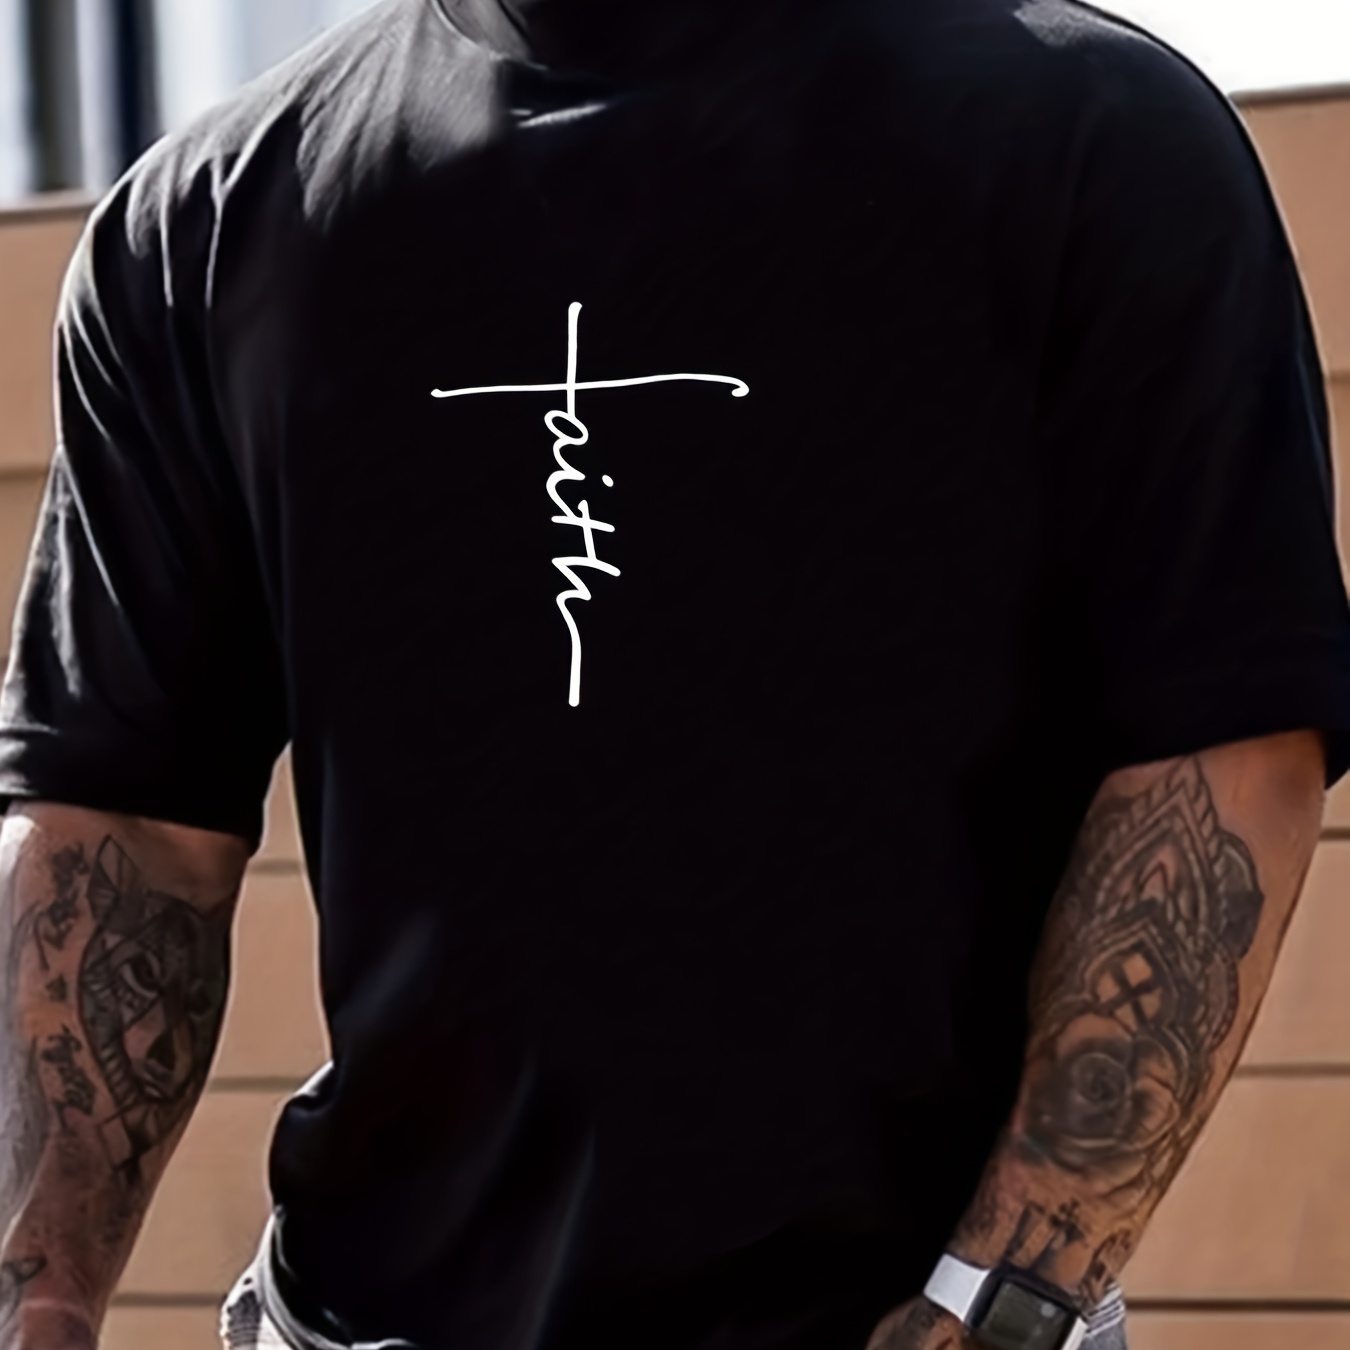 ''faith'' Print, Men's Casual Round Neck T-shirt, Loose Tees For Running, Training